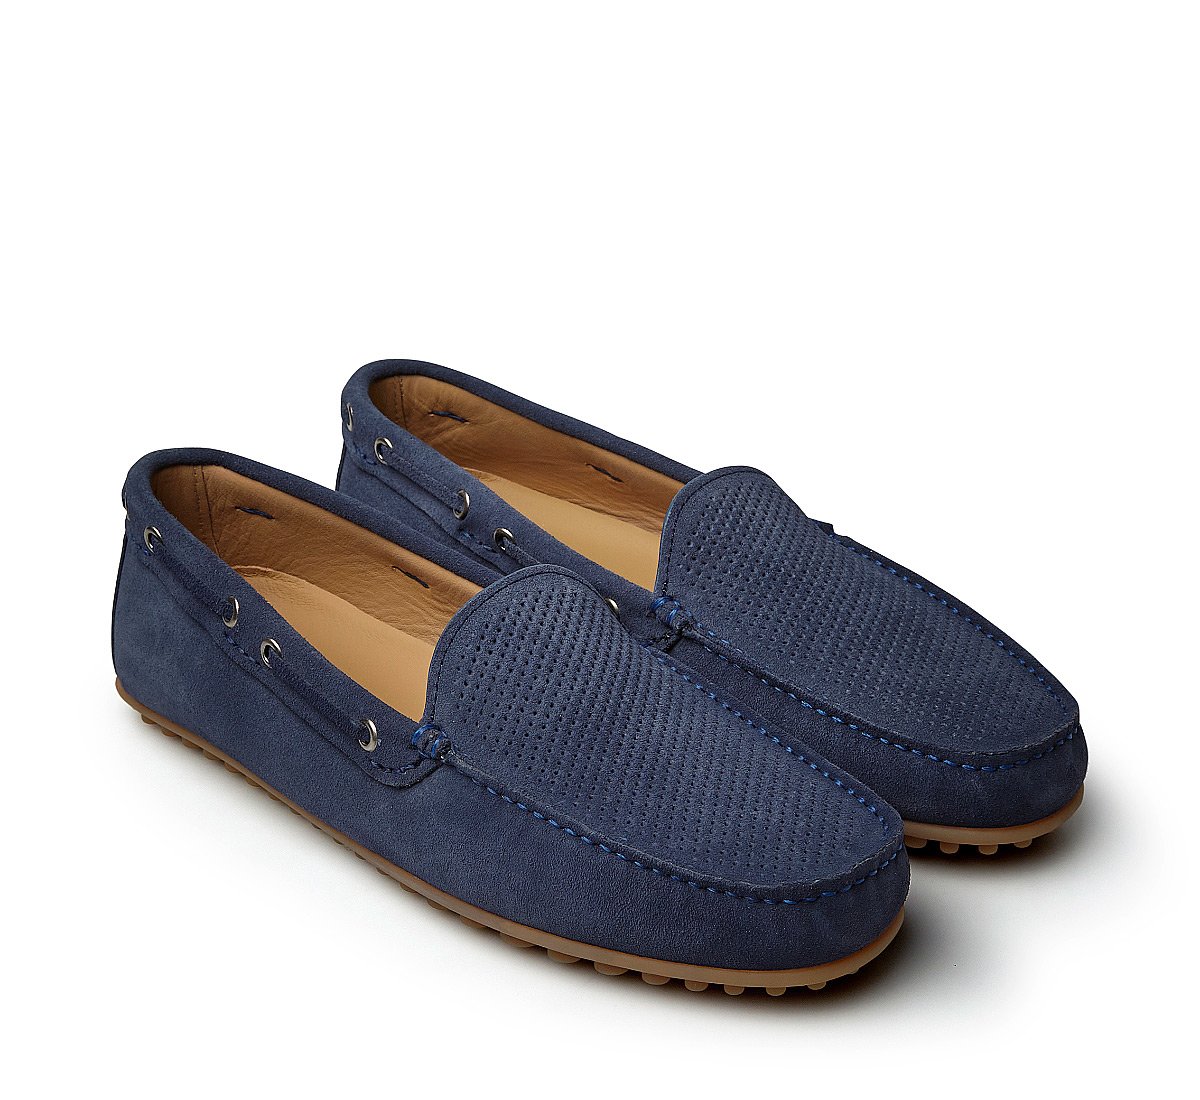 Driving loafer in suede